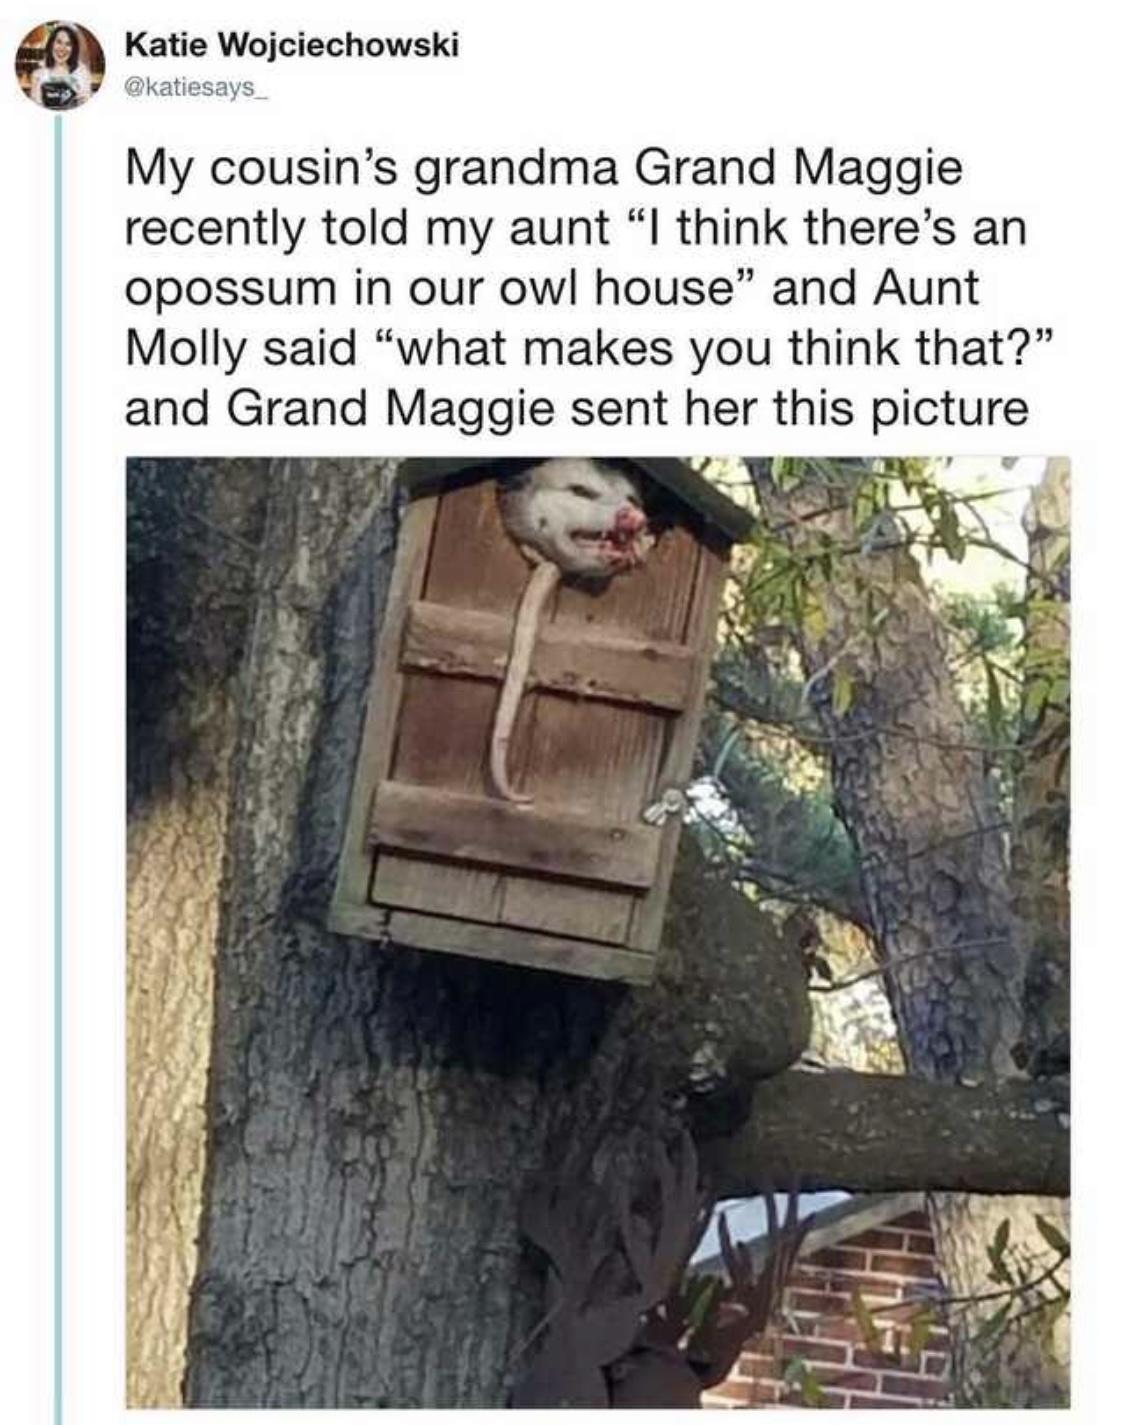 wholesome possum memes - Katie Wojciechowski My cousin's grandma Grand Maggie recently told my aunt "I think there's an opossum in our owl house" and Aunt Molly said "what makes you think that? and Grand Maggie sent her this picture